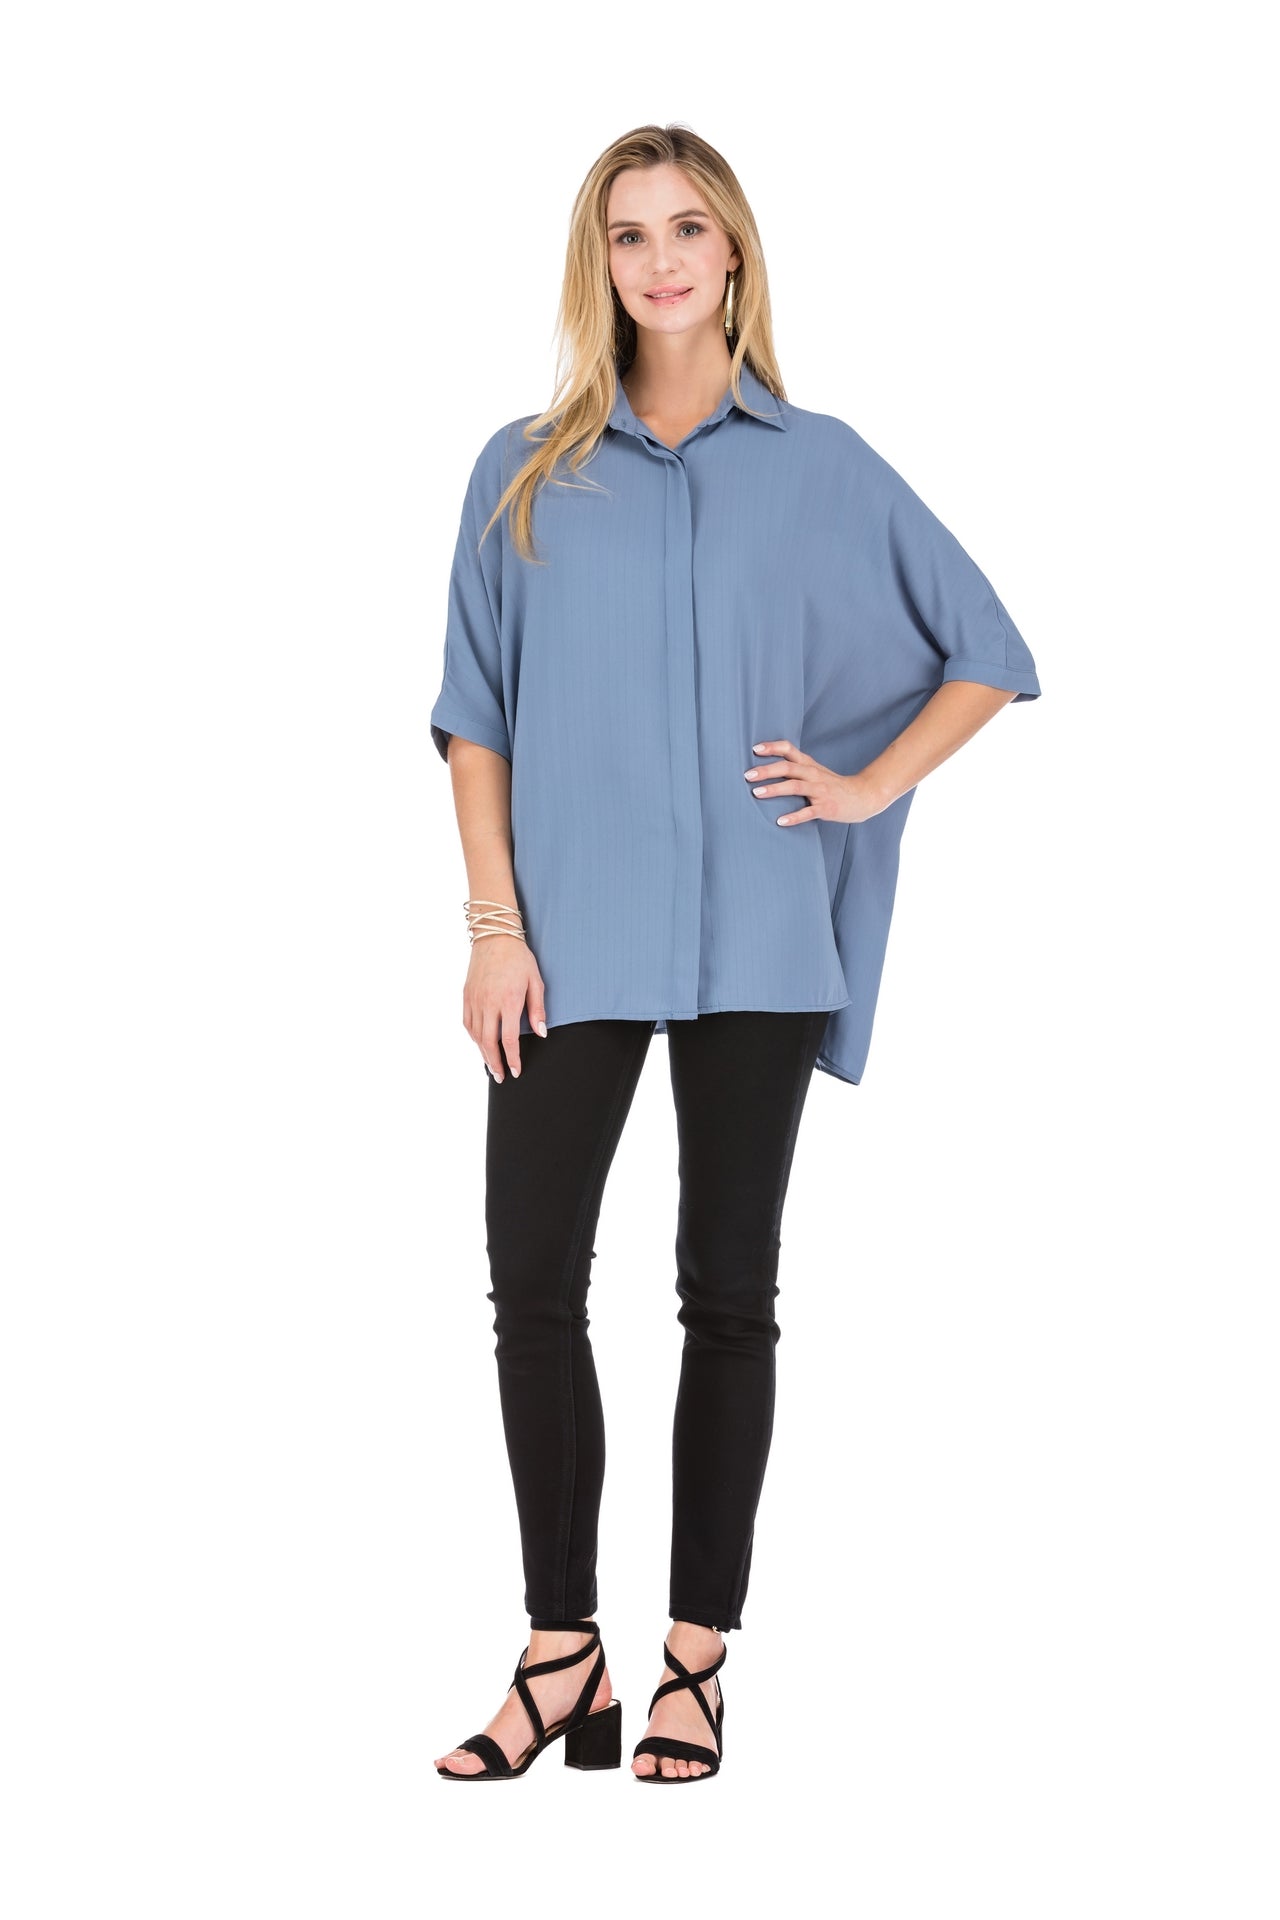 JADE- BUTTON OVER SHIRT IN ASSORTED COLORS